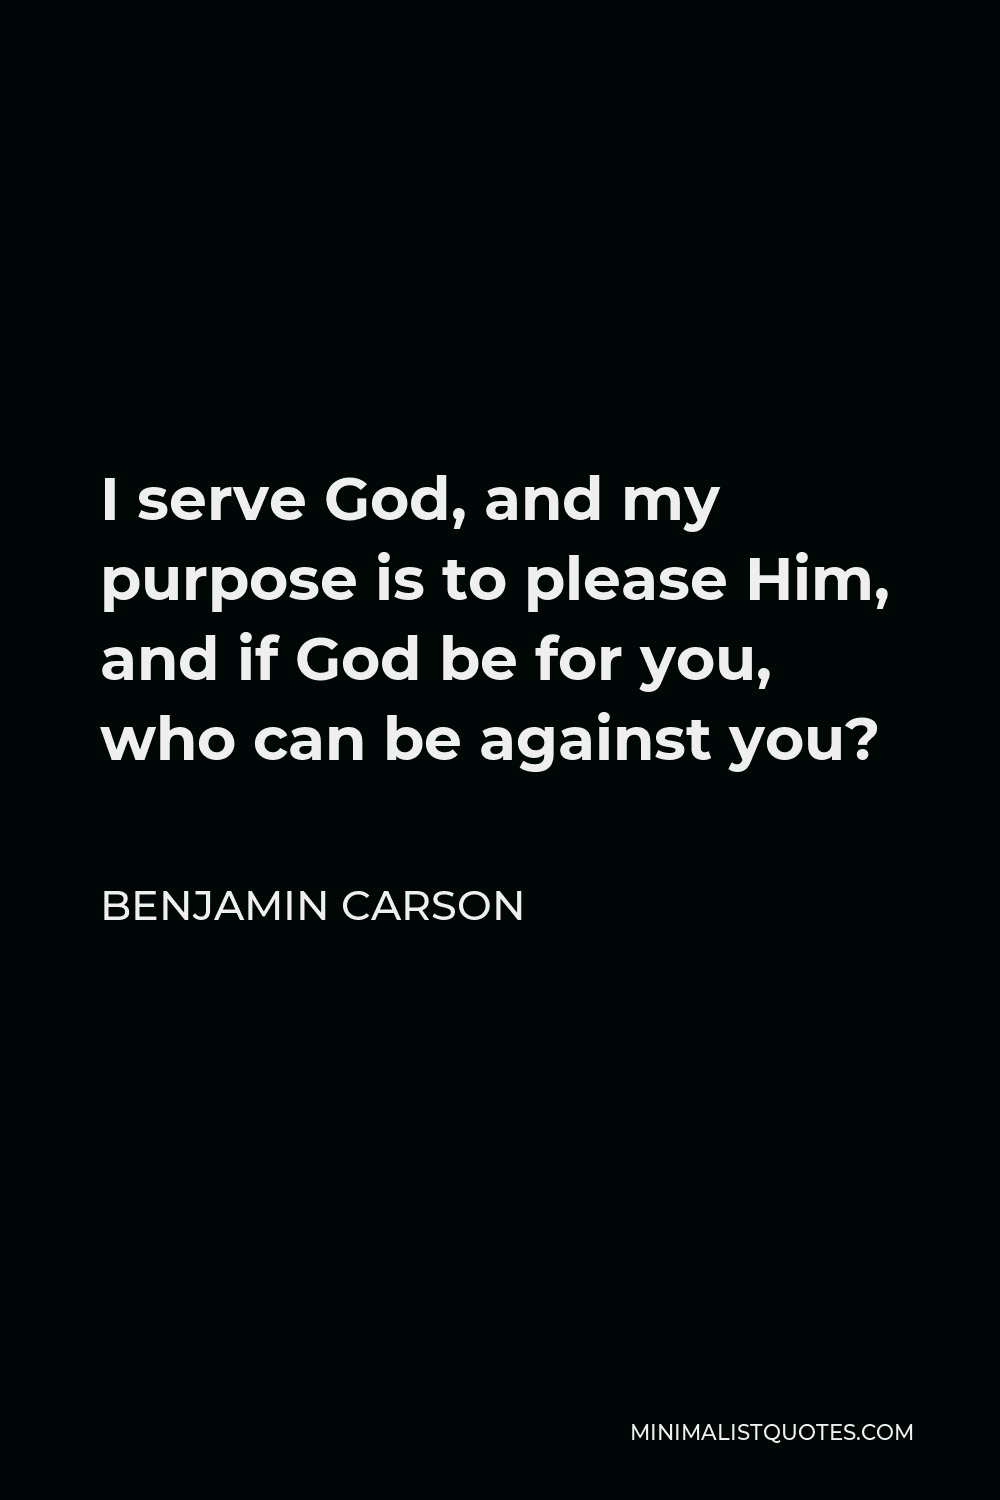 Benjamin Carson Quote - I serve God, and my purpose is to please Him, and if God be for you, who can be against you?